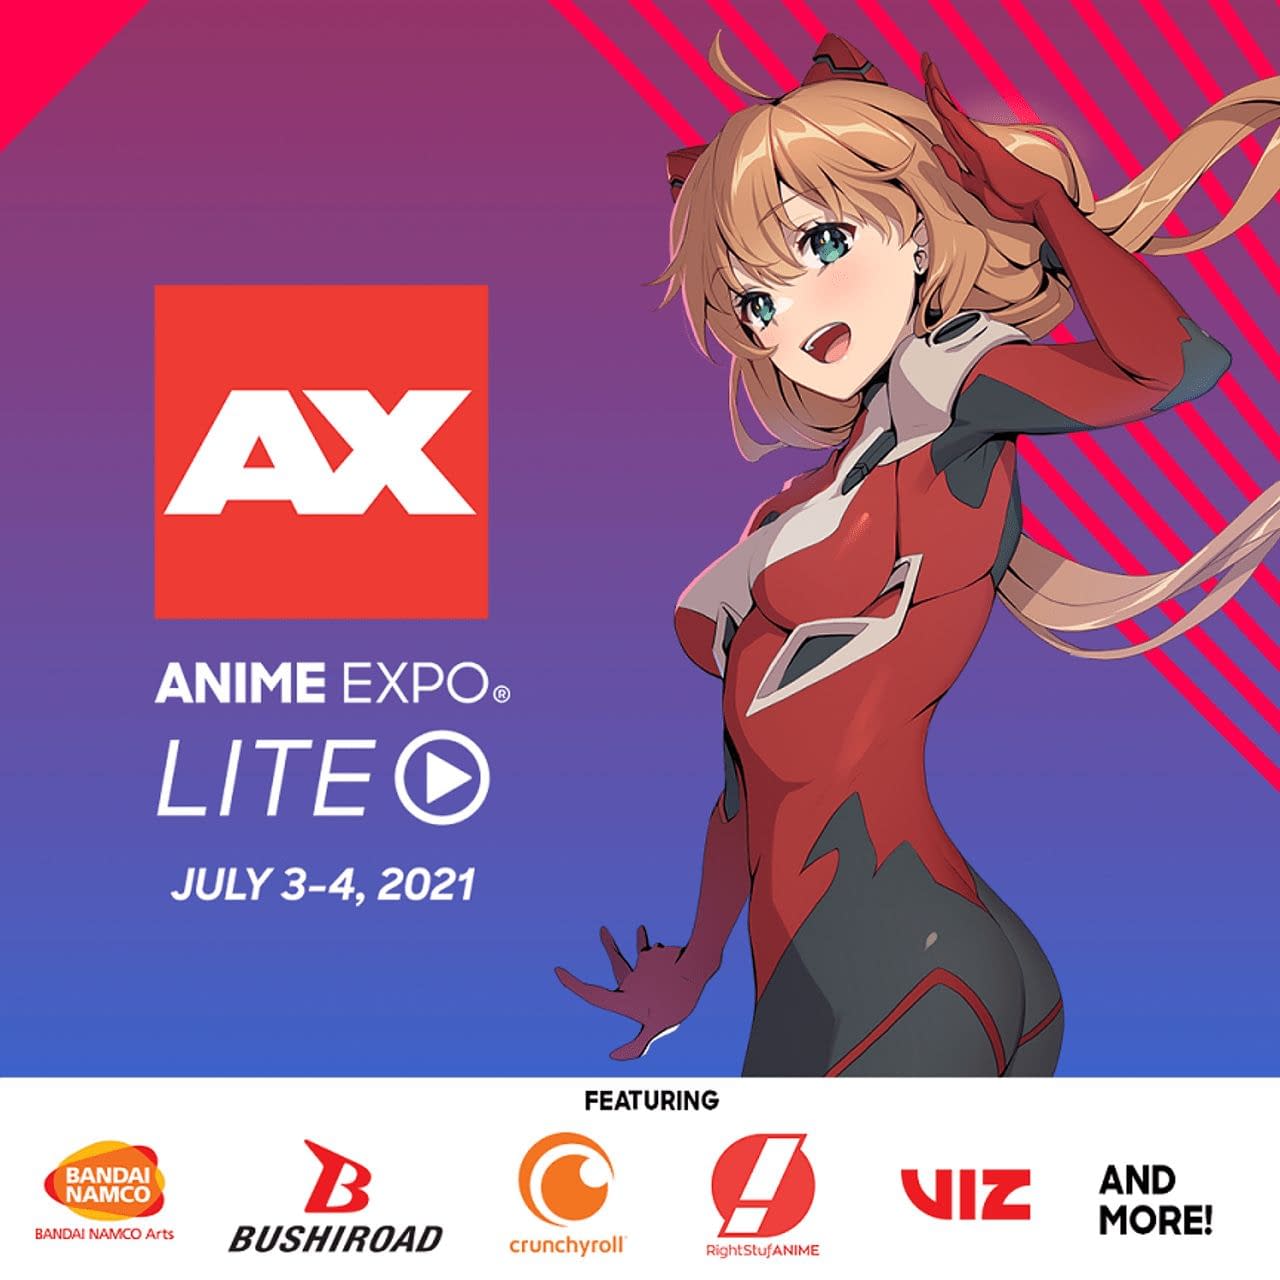 Riot Games' League of Legends Team Joins Anime Expo Lite! - Anime Expo